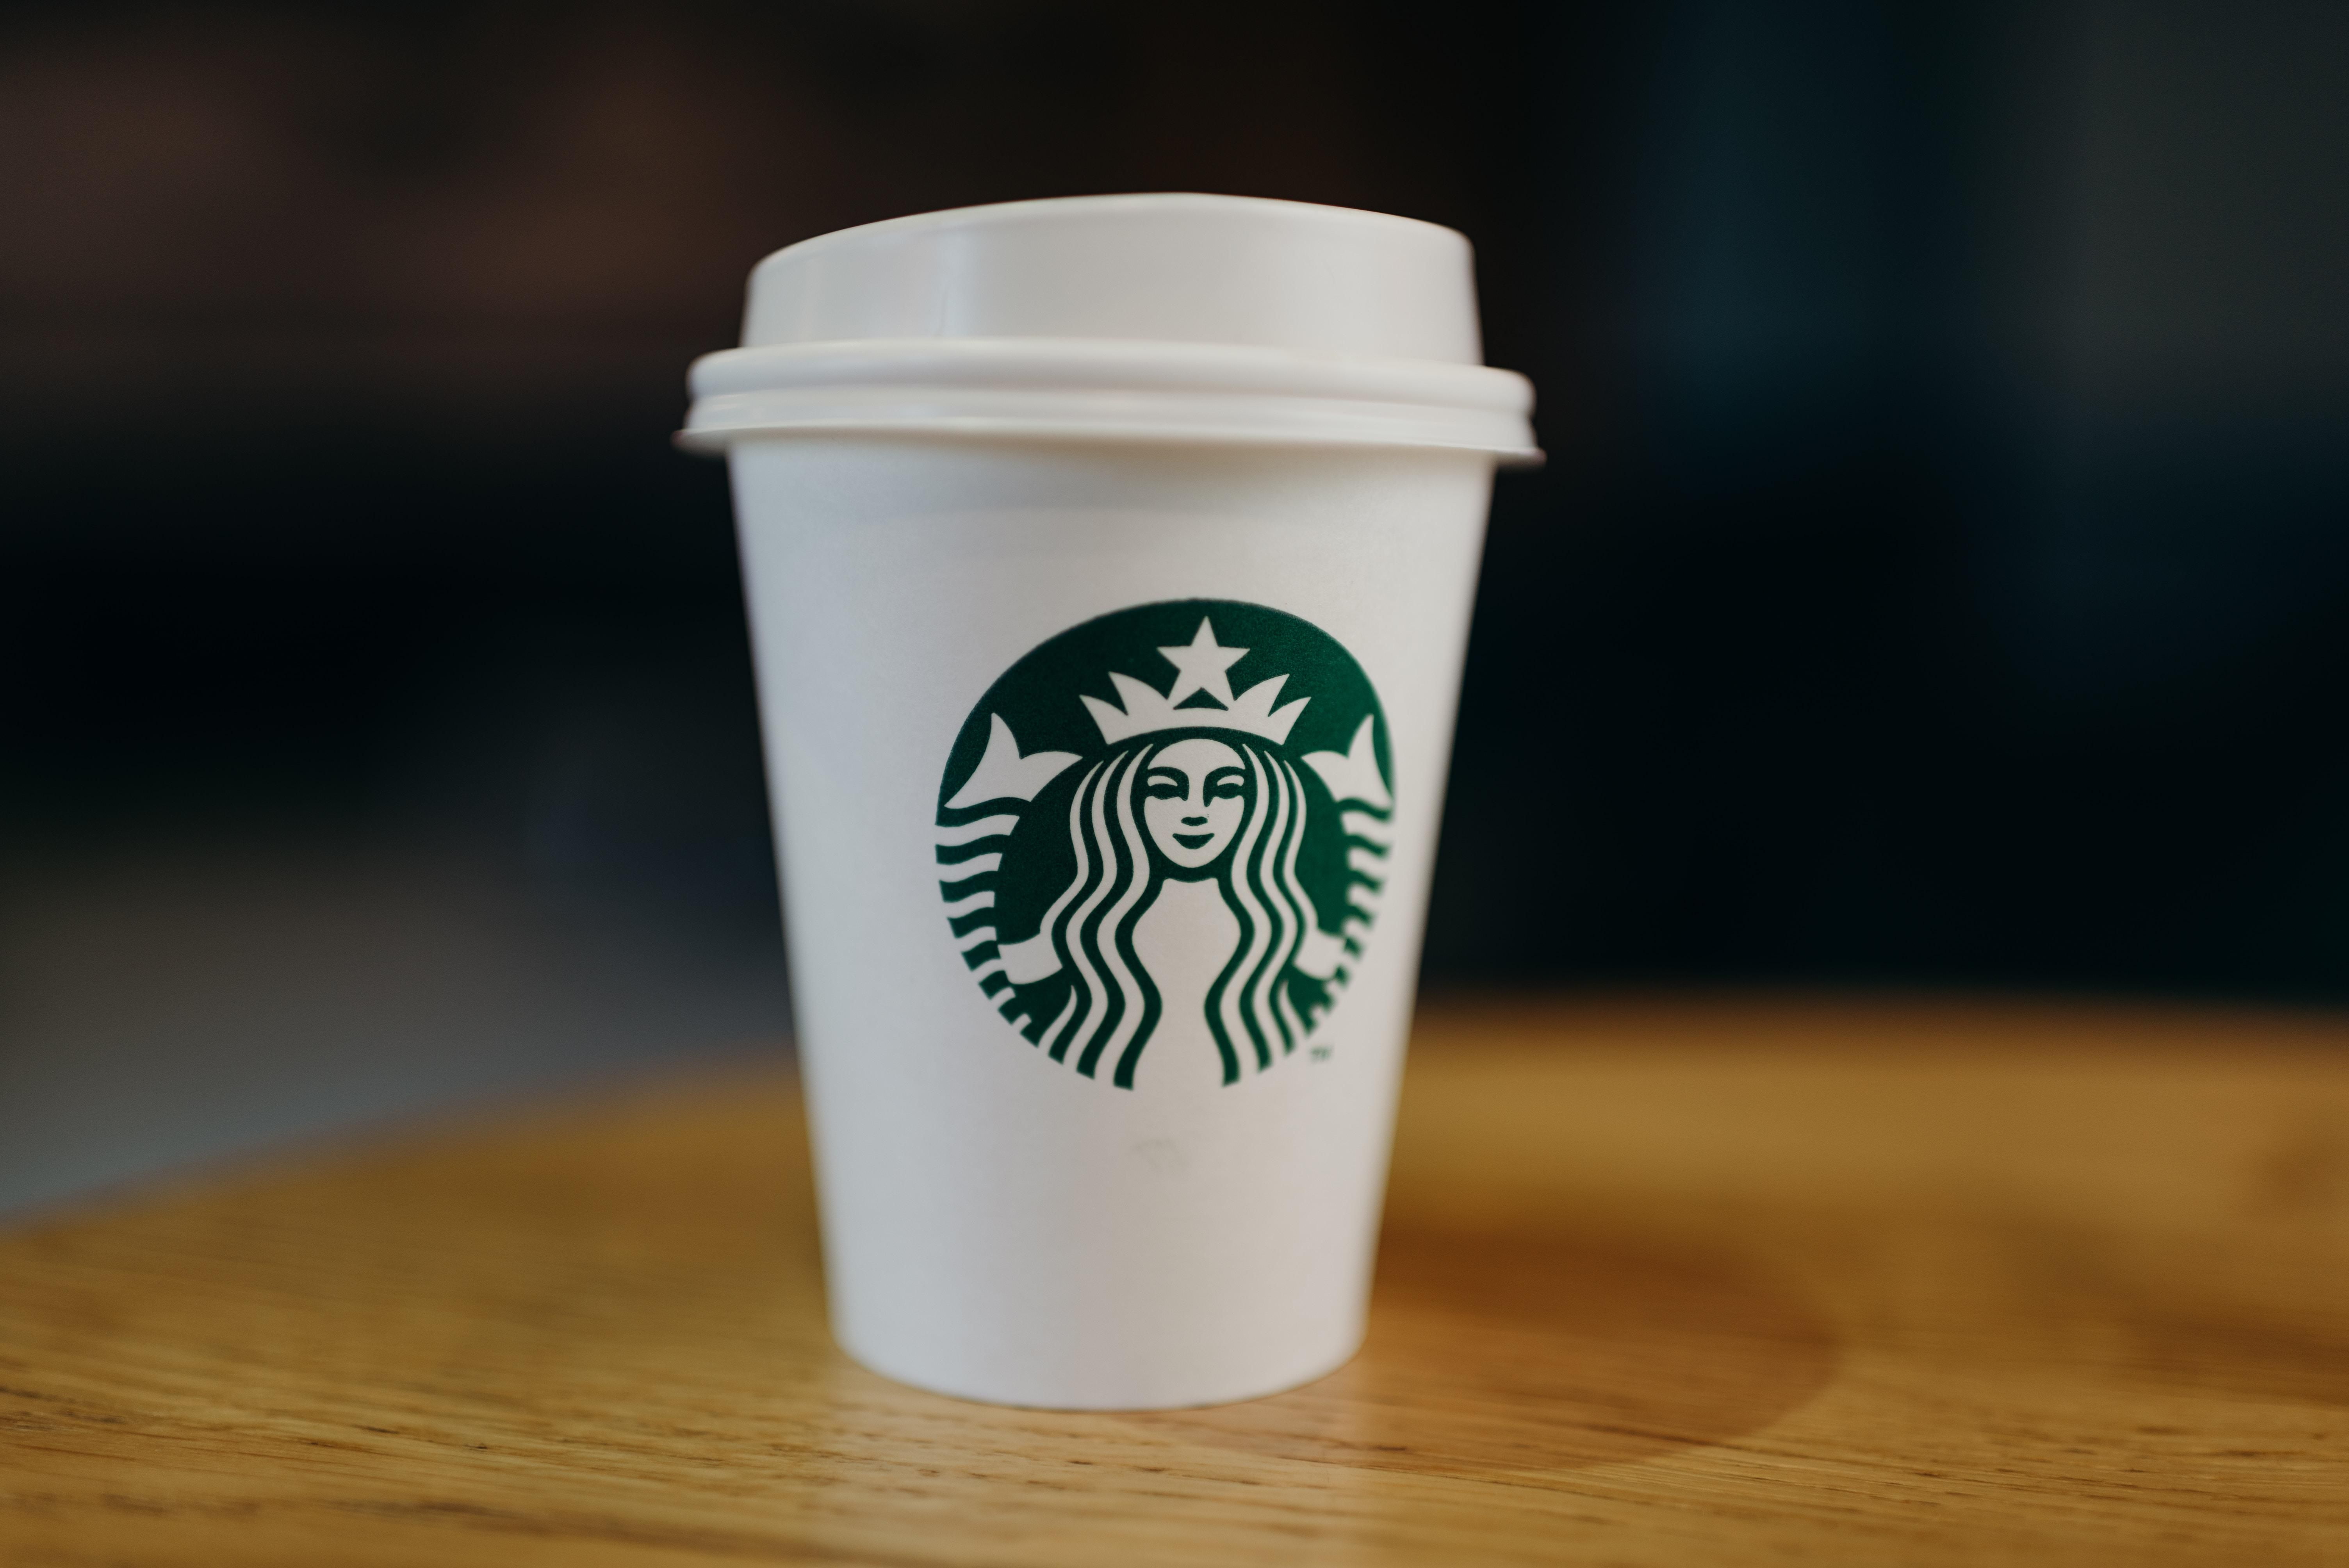 Starbucks wants to phase out iconic disposable cups with washing stations